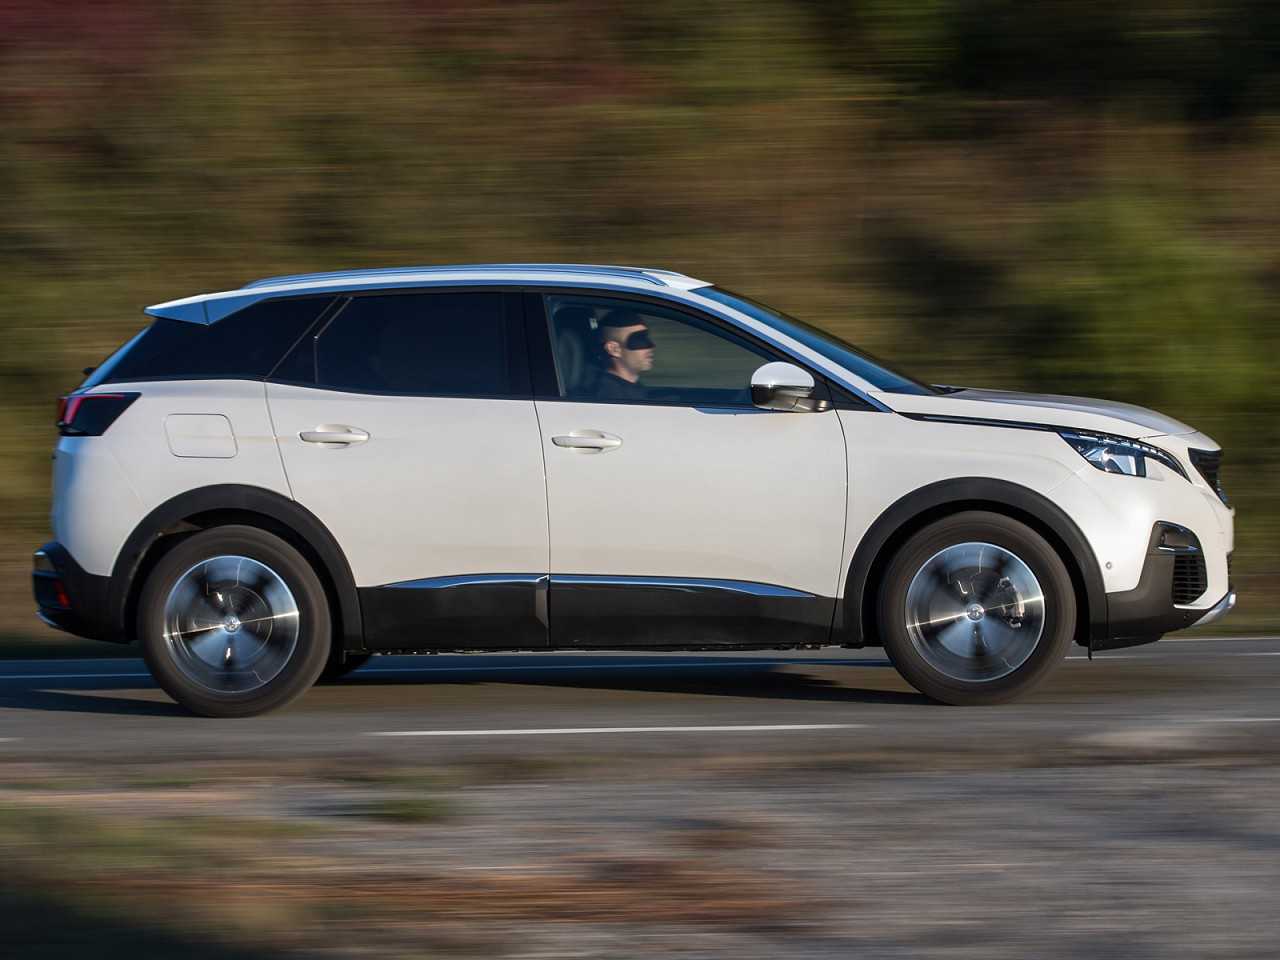 Peugeot3008 2018 - lateral